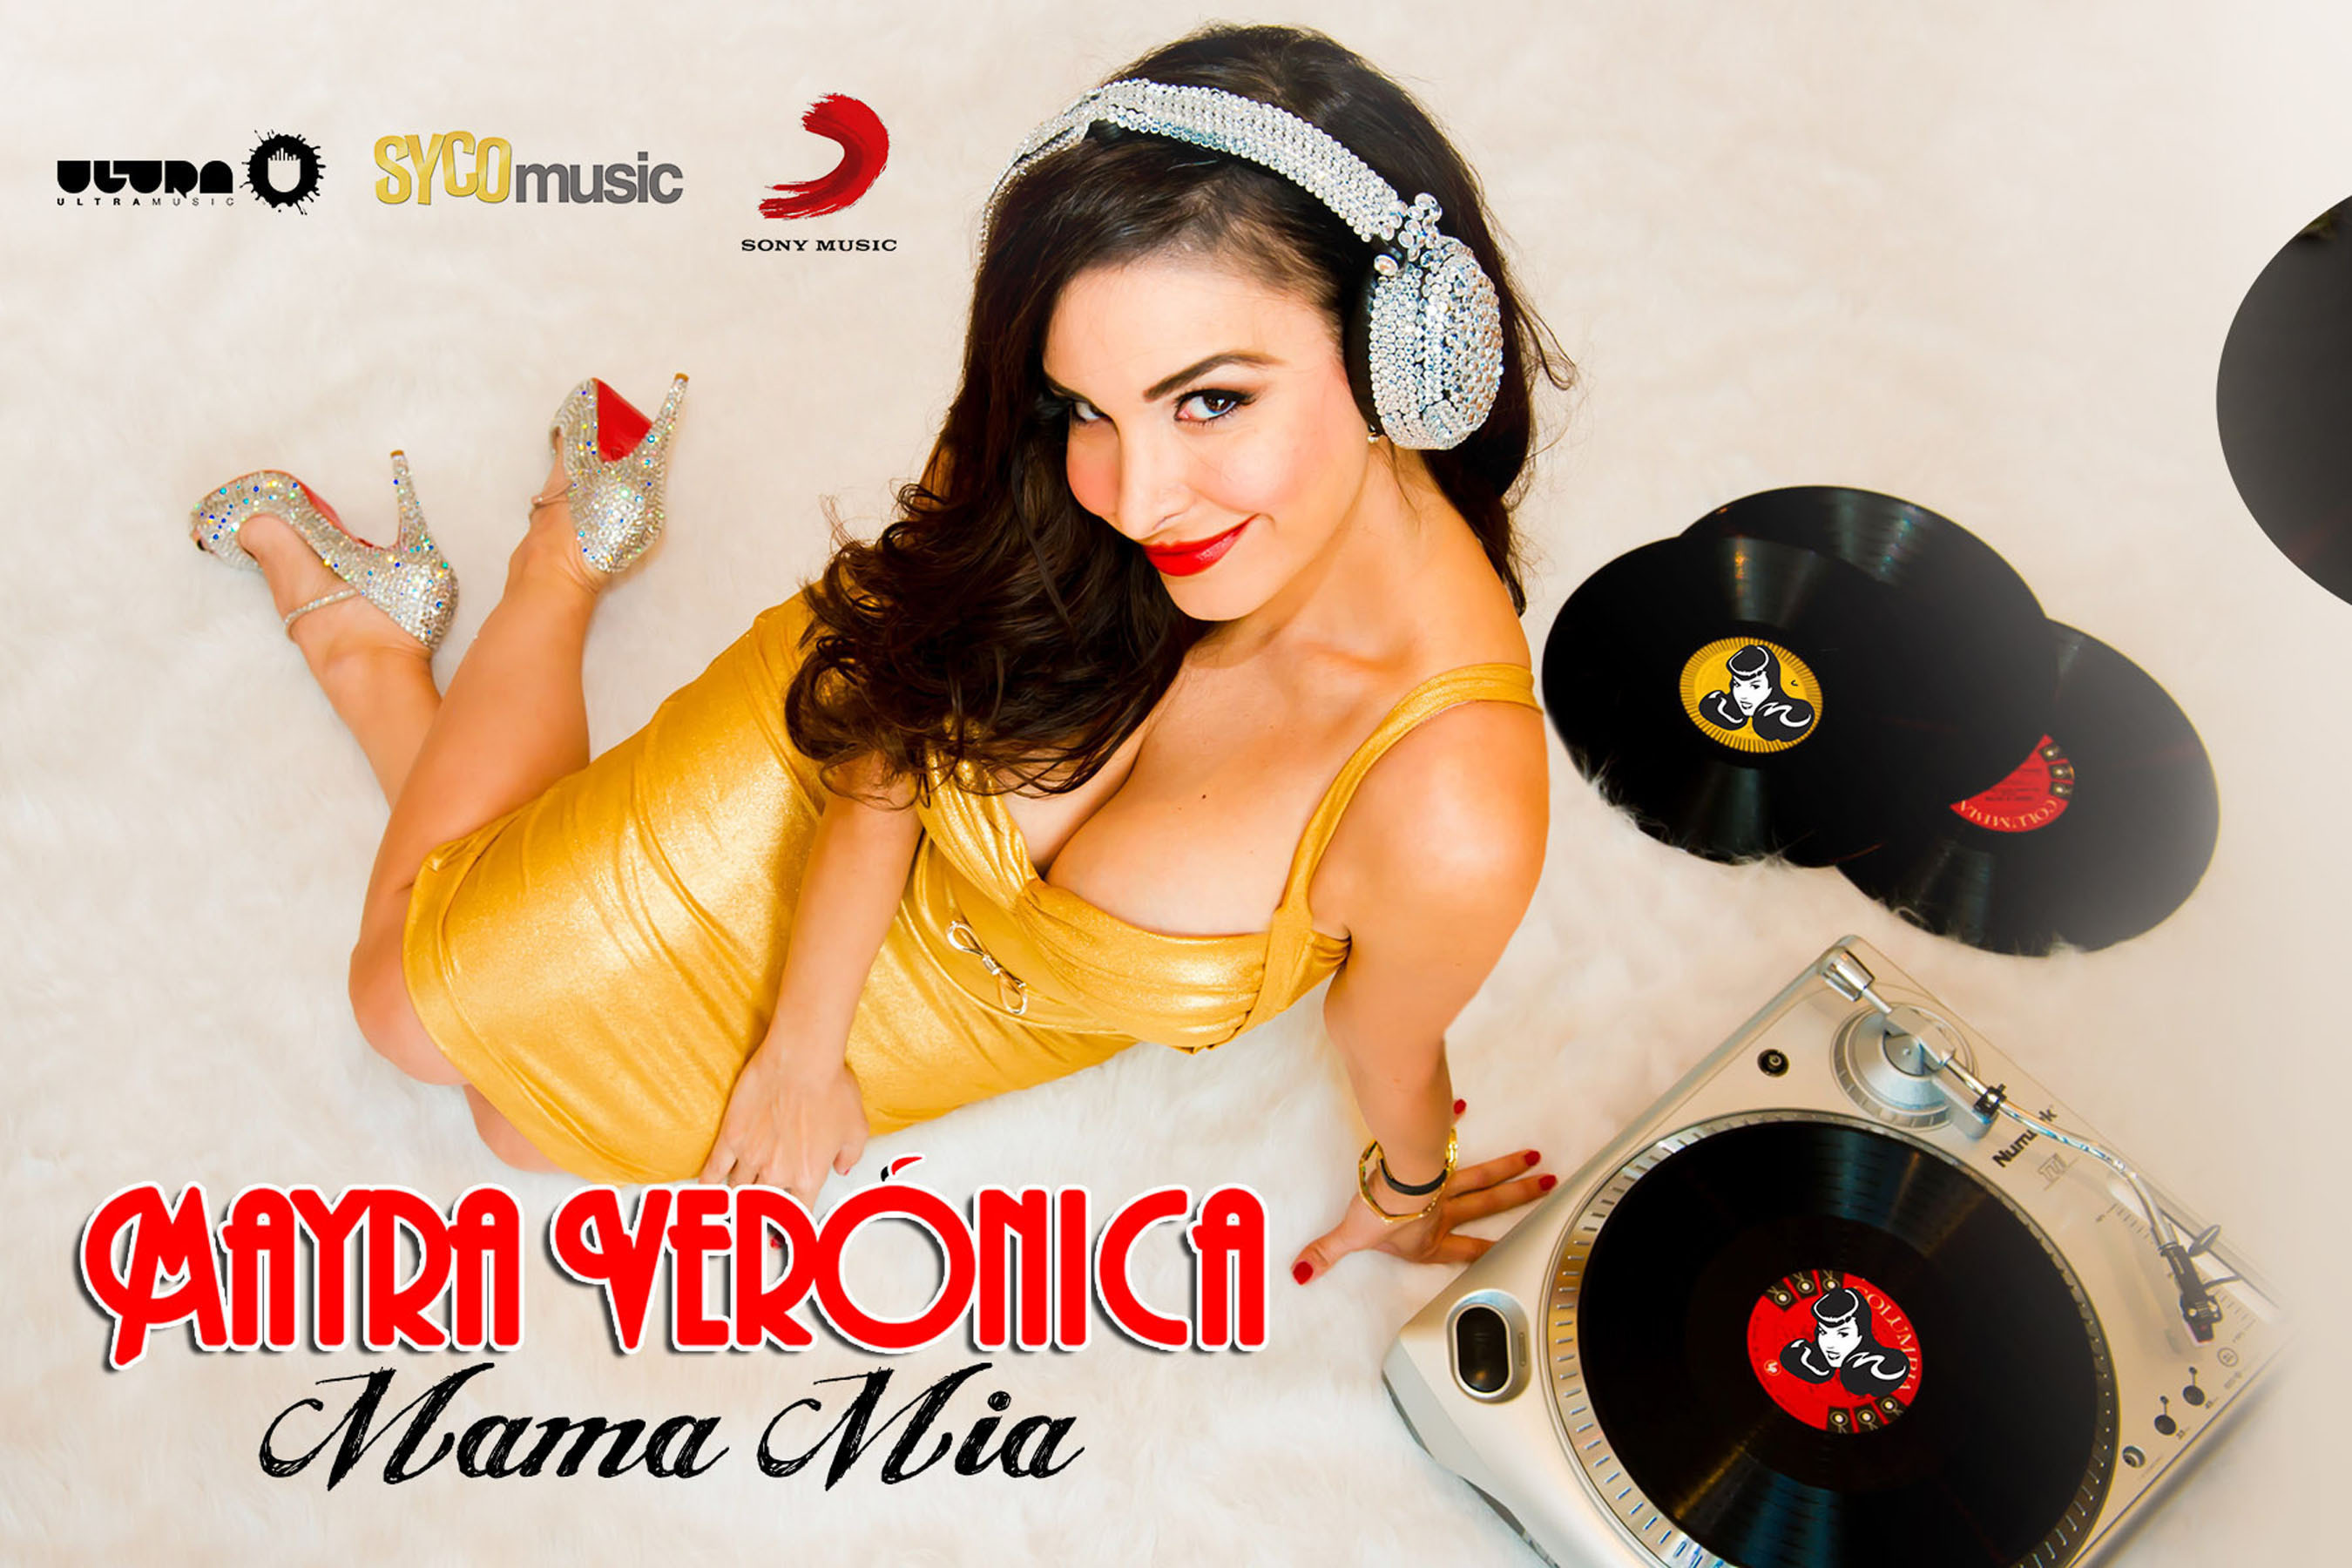 Mayra Veronica's Mega Hit "Mama Mia" Signed by Ultra Music in Joint Venture with Syco Music. (PRNewsFoto/MVA Entertainment Group) (PRNewsFoto/MVA ENTERTAINMENT GROUP)